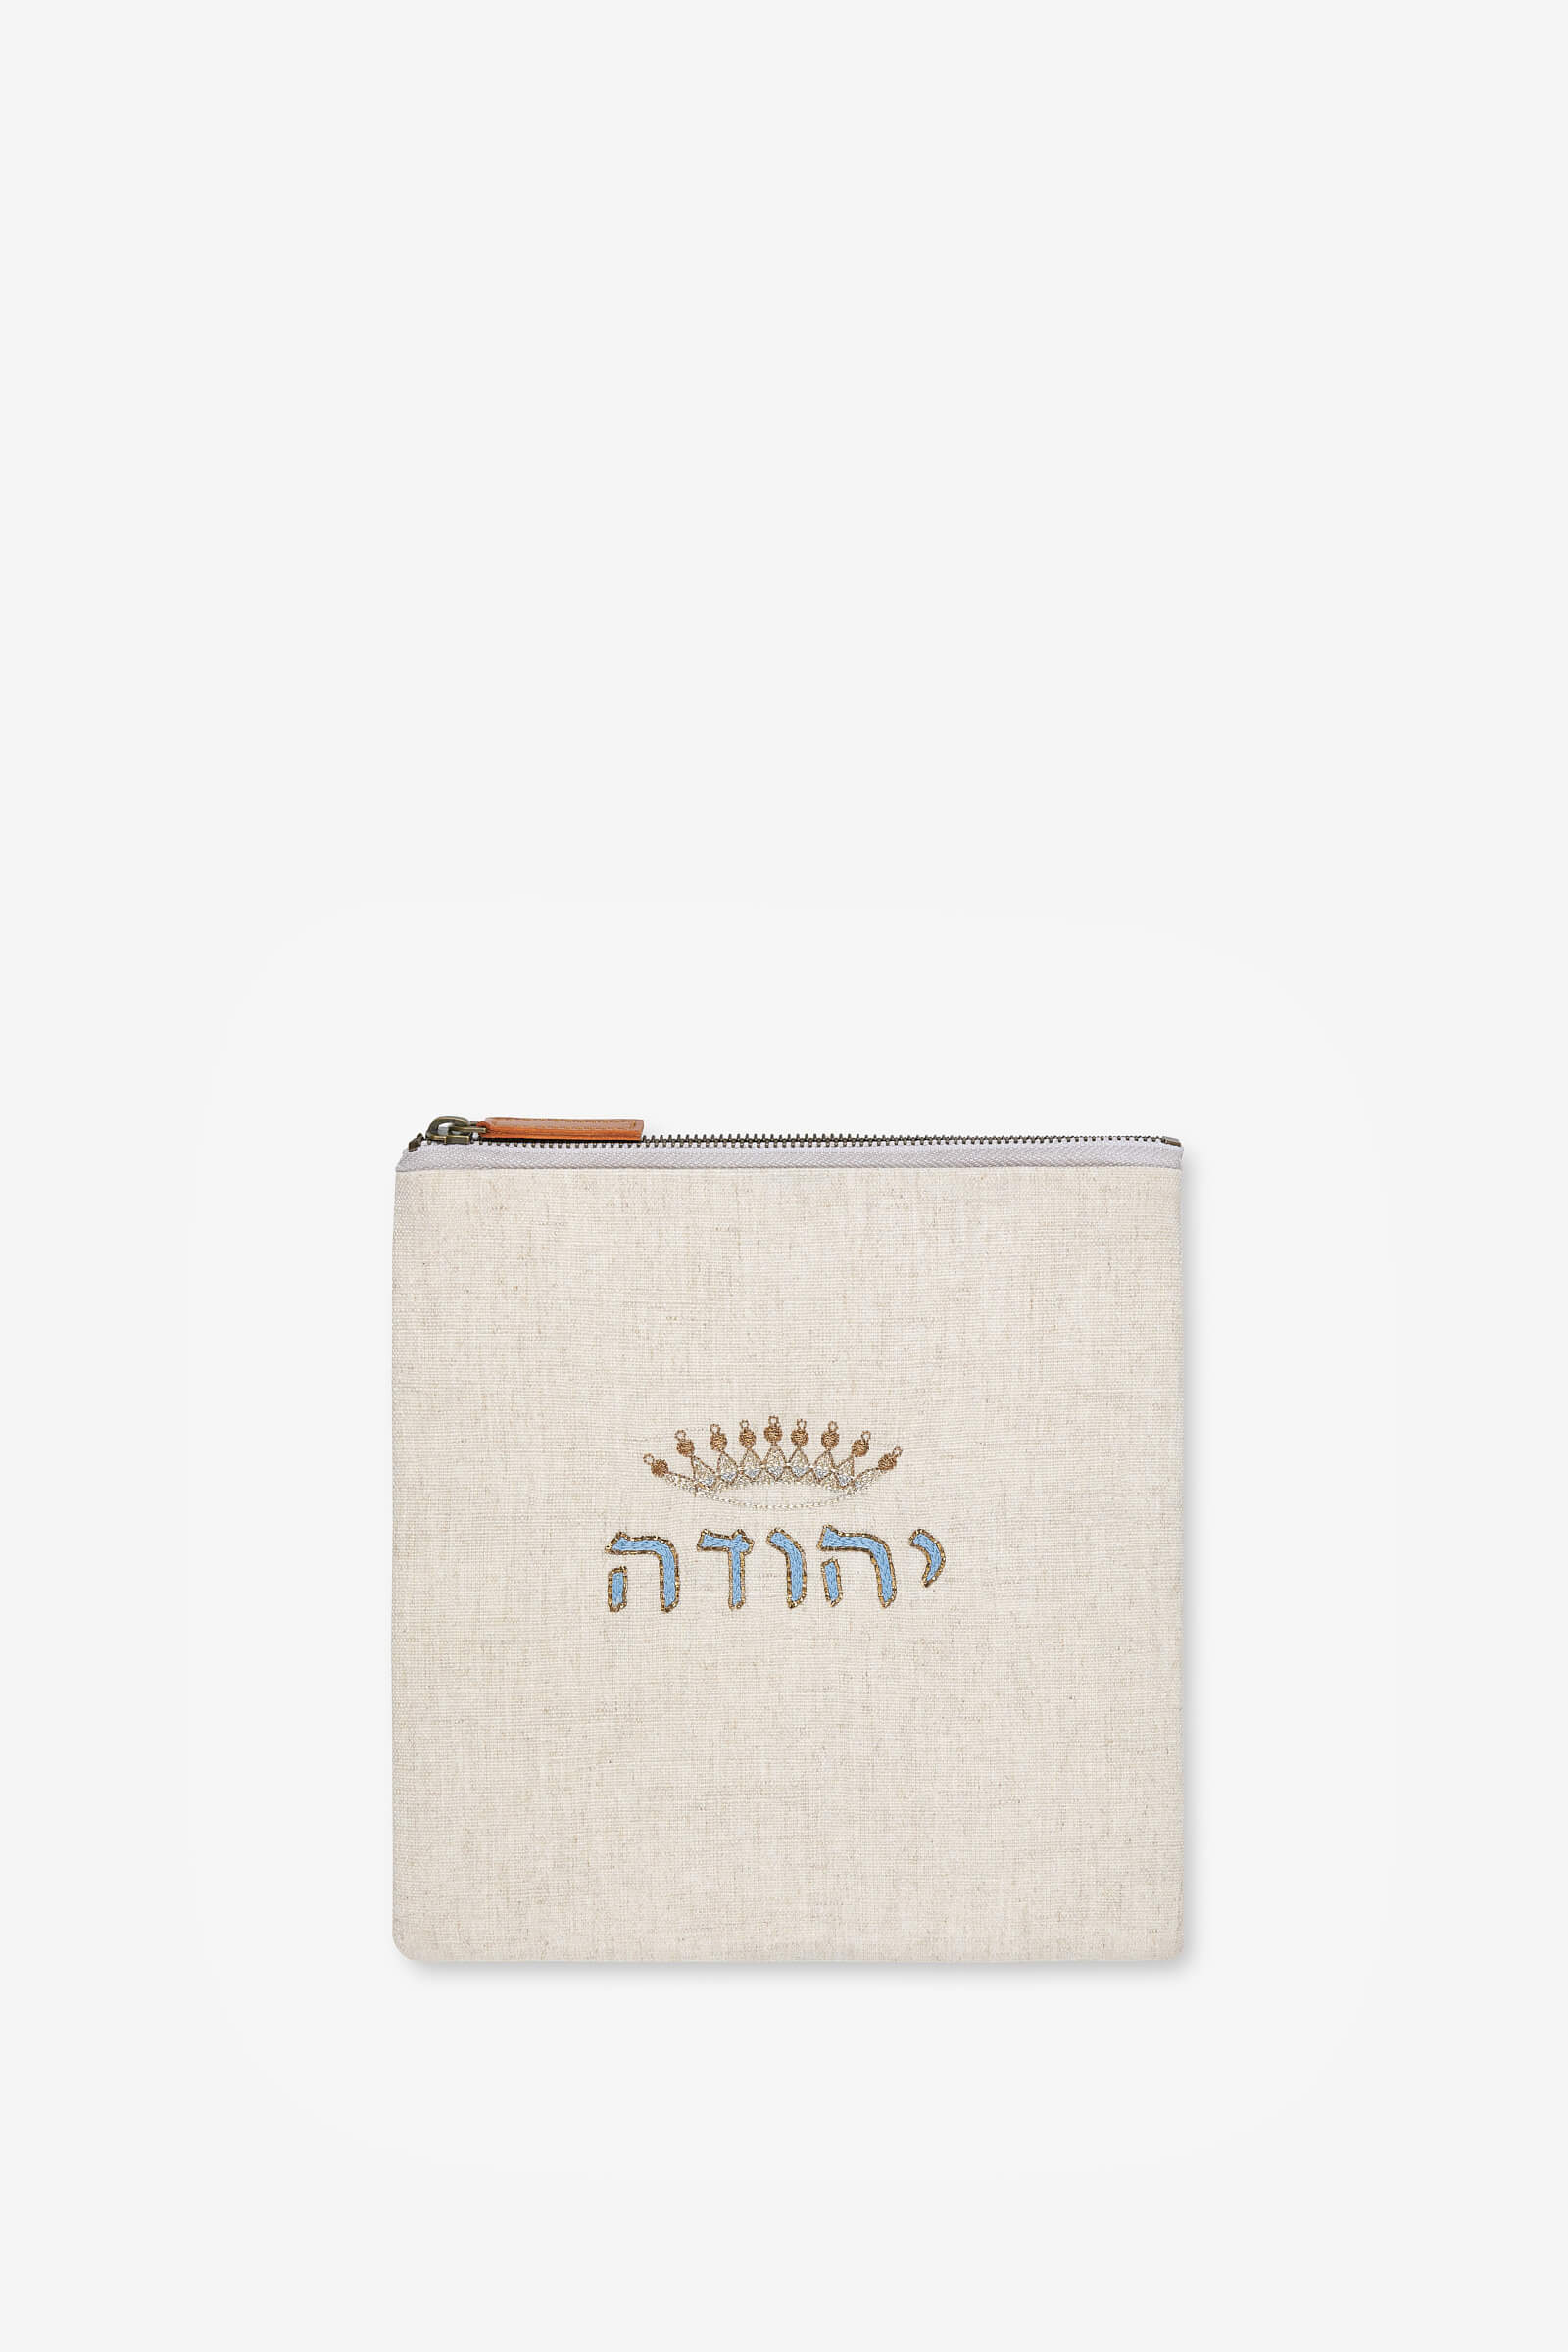 Atoof Collection JudahTefillin FrontShot